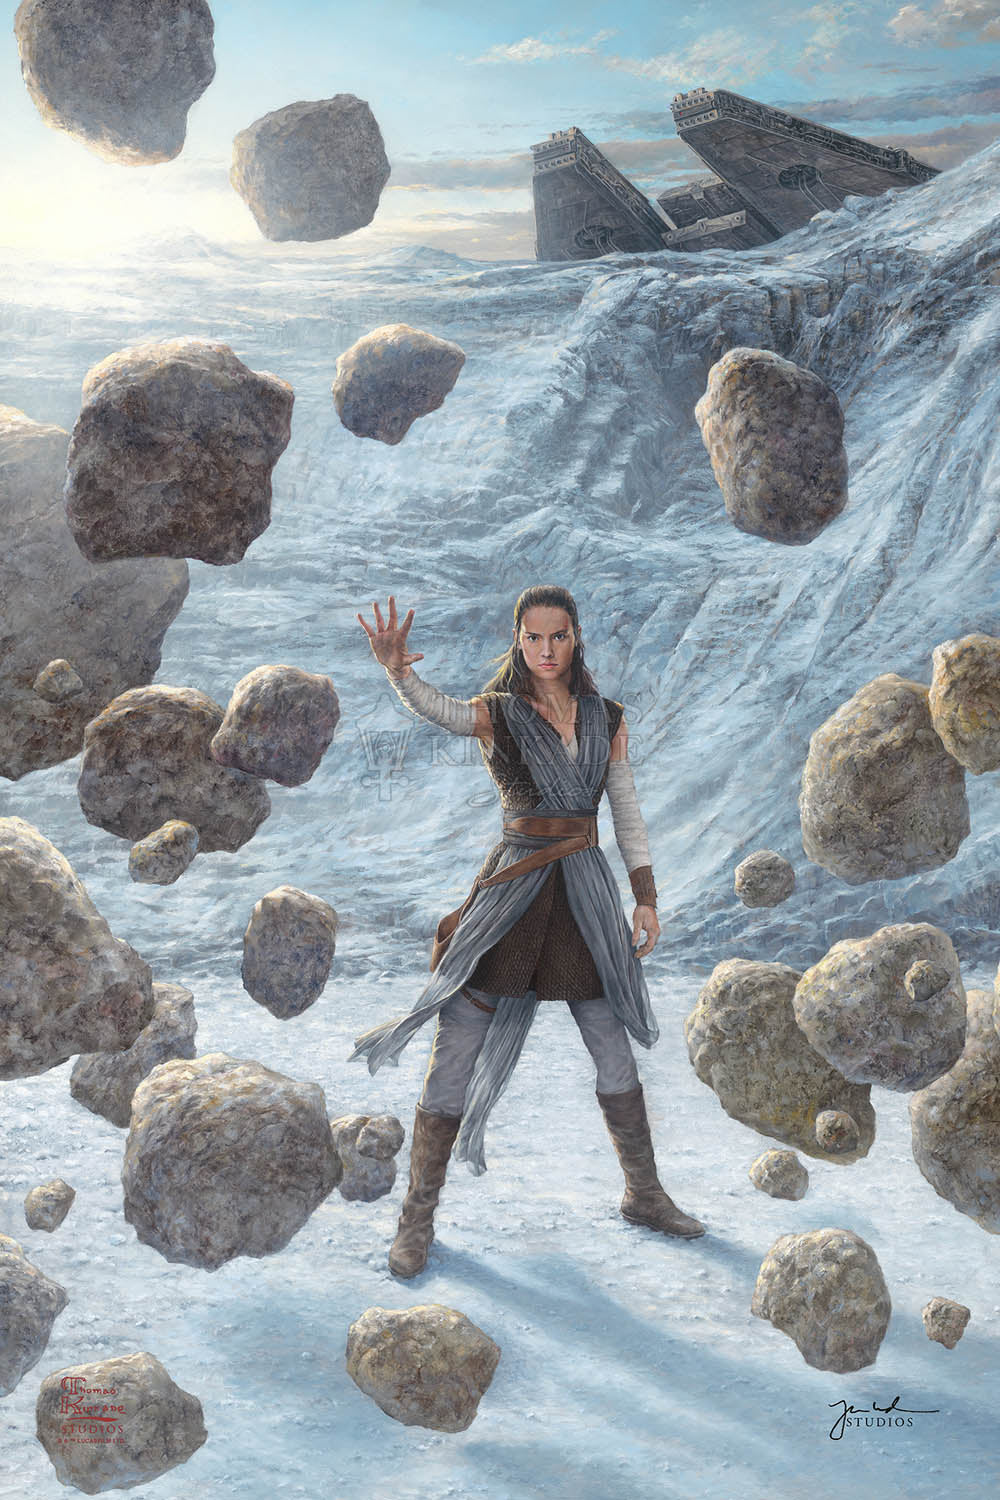 rey uses the force to lift the boulders - unframed